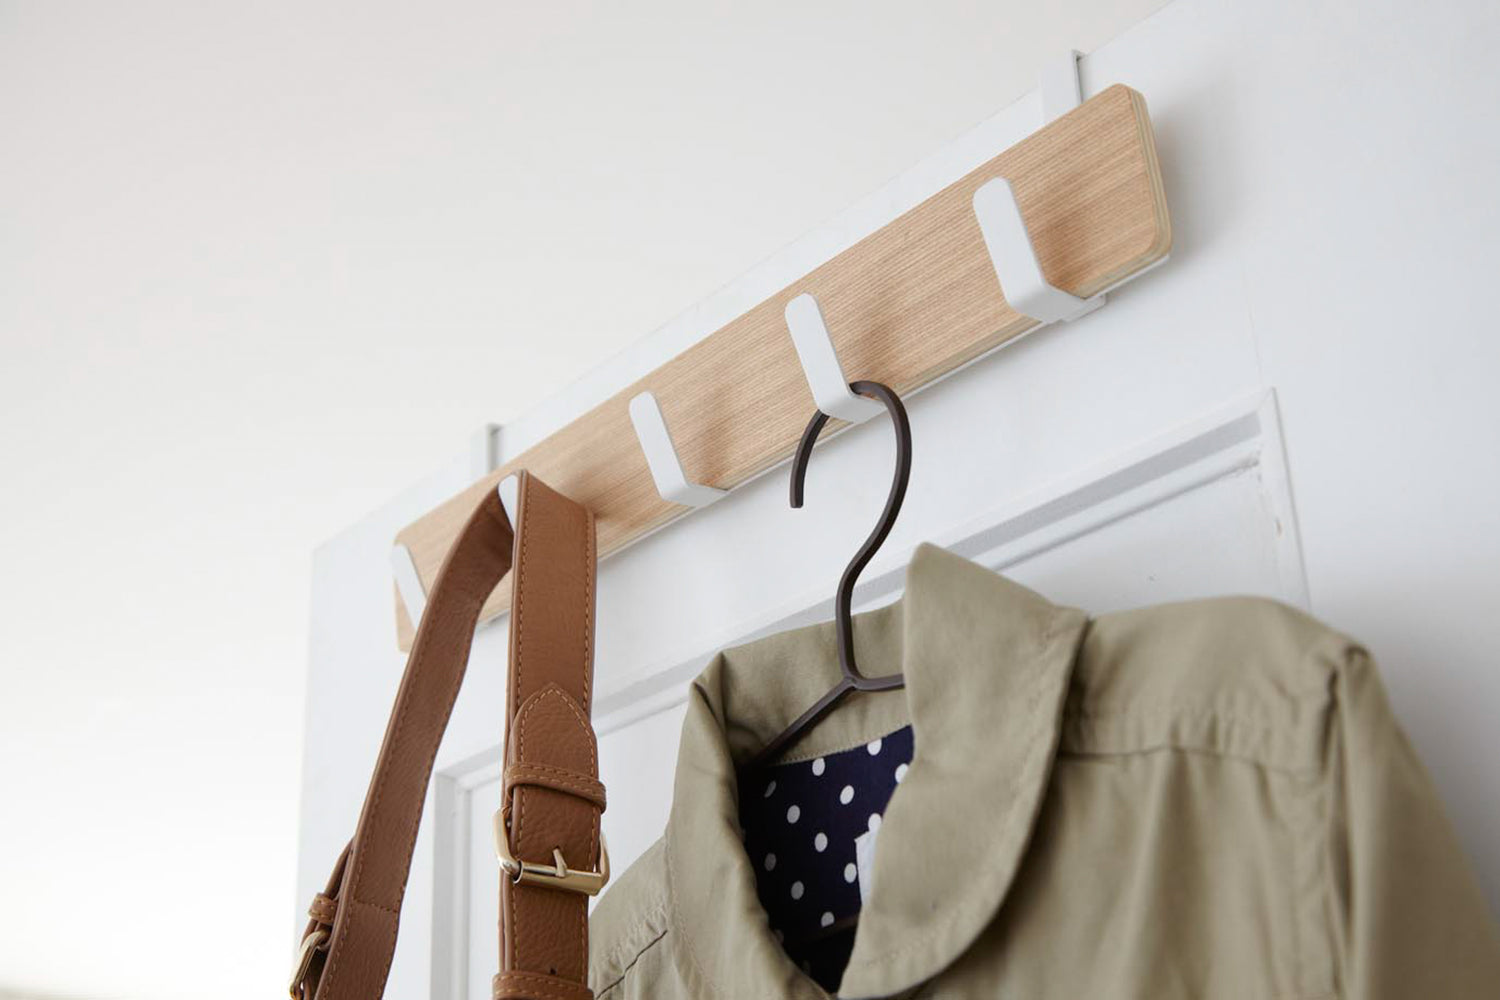 View 4 - Over-the-Door Hanger displaying jacket and bag by Yamazaki Home.